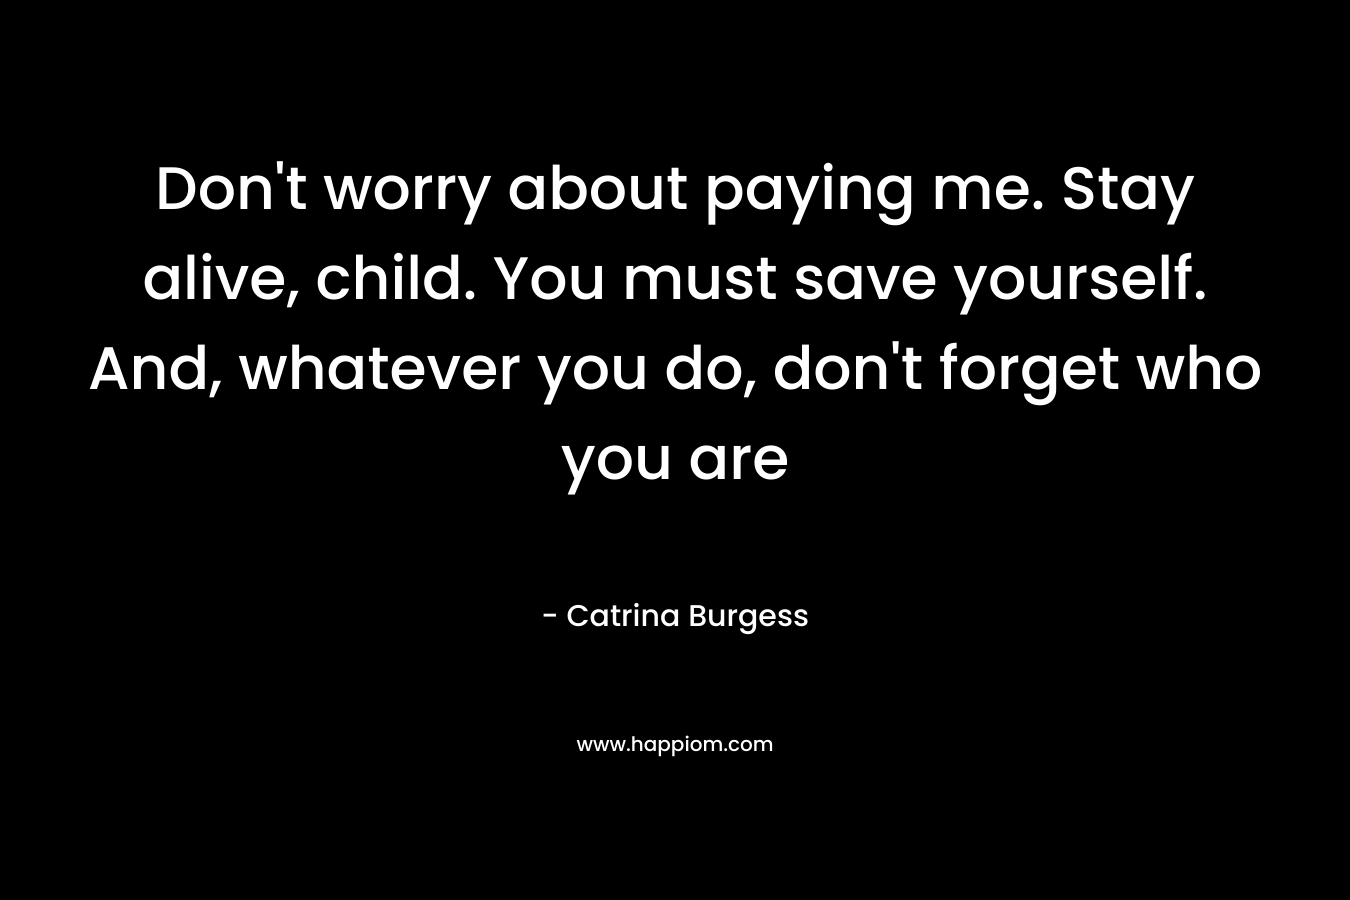 Don’t worry about paying me. Stay alive, child. You must save yourself. And, whatever you do, don’t forget who you are – Catrina Burgess